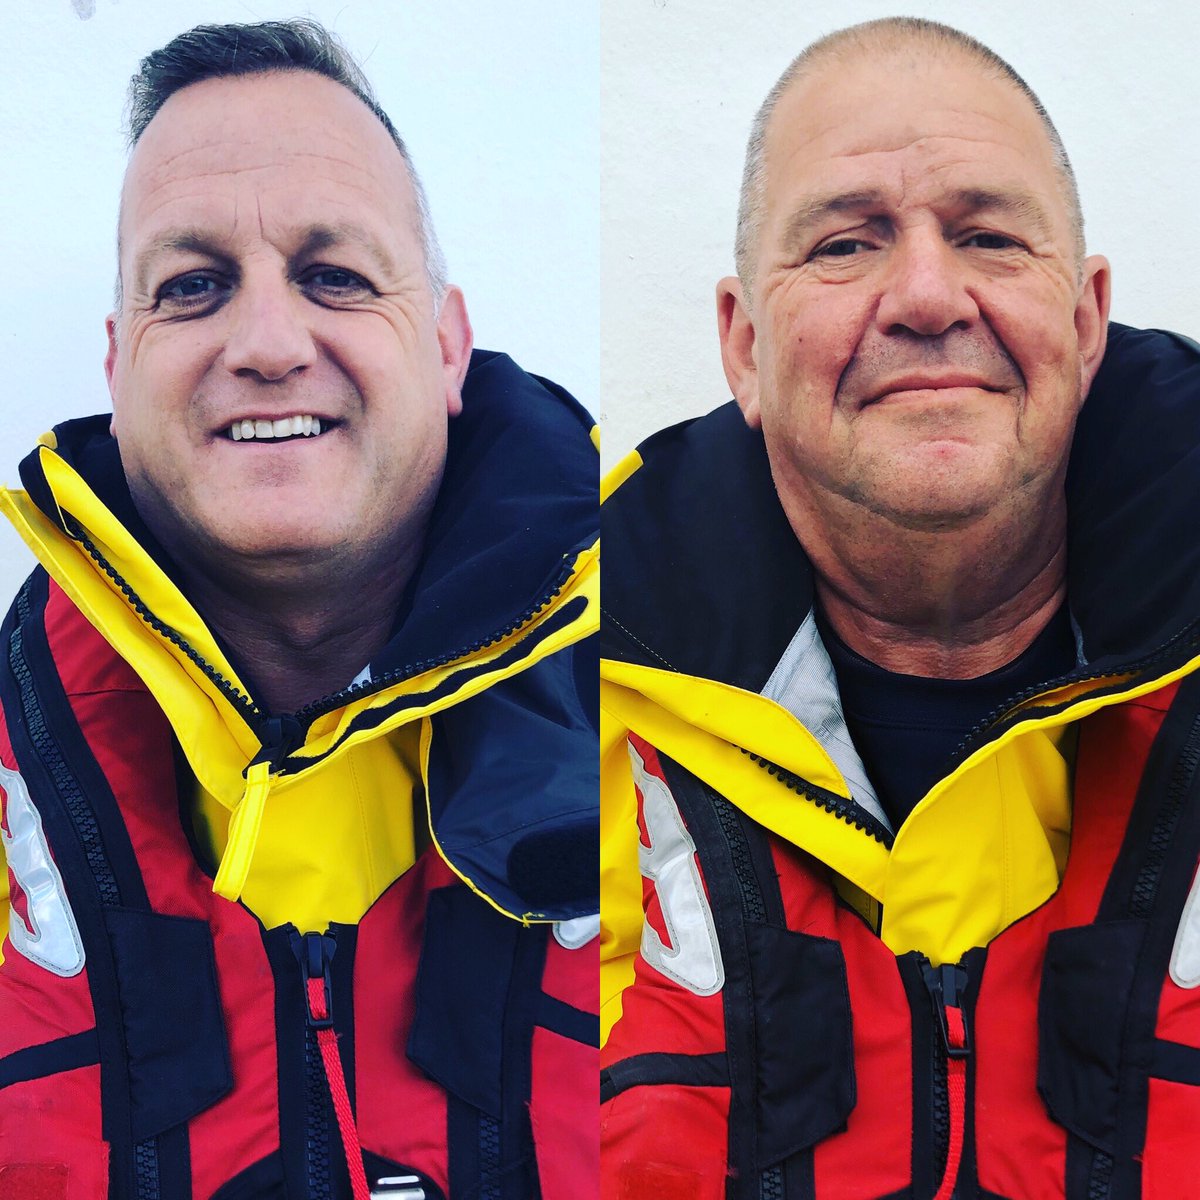 As we remain on service and ready to #SaveLivesAtSea, we want to give a big shout out to two of our volunteer crew, Simon Collins and Richard Crust!

Both are key workers in the postal service and are working tirelessly as well as remaining on call to respond a shout! 👏👏👏